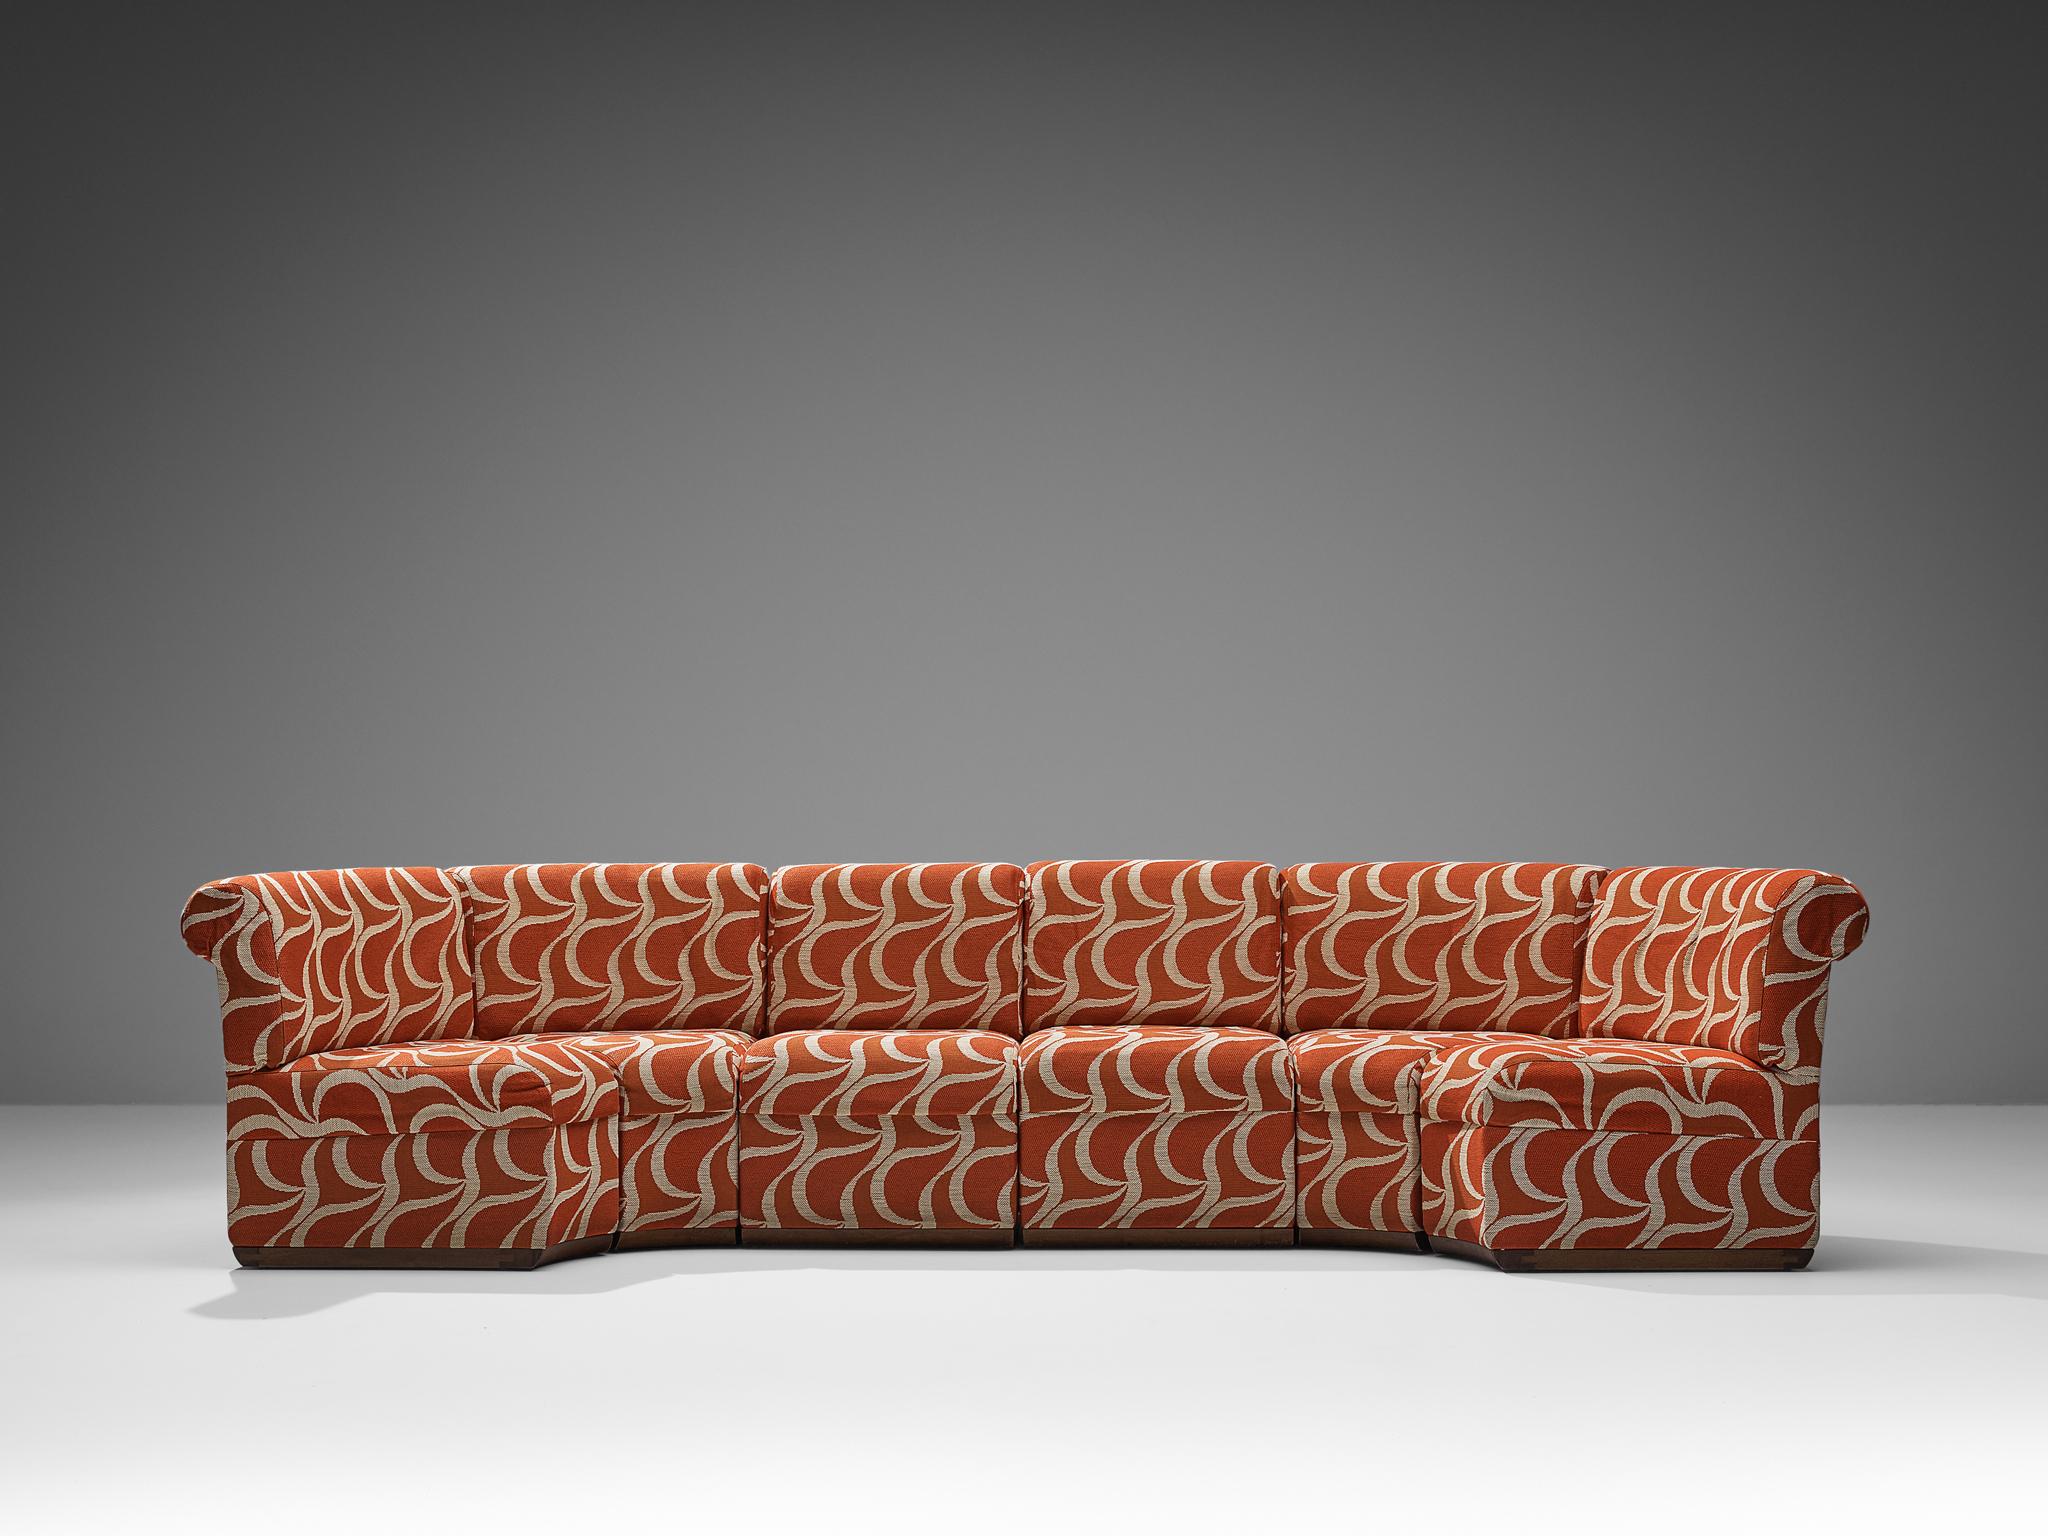 Late 20th Century Italian Sectional Sofa in Red Orange Patterned Upholstery  For Sale